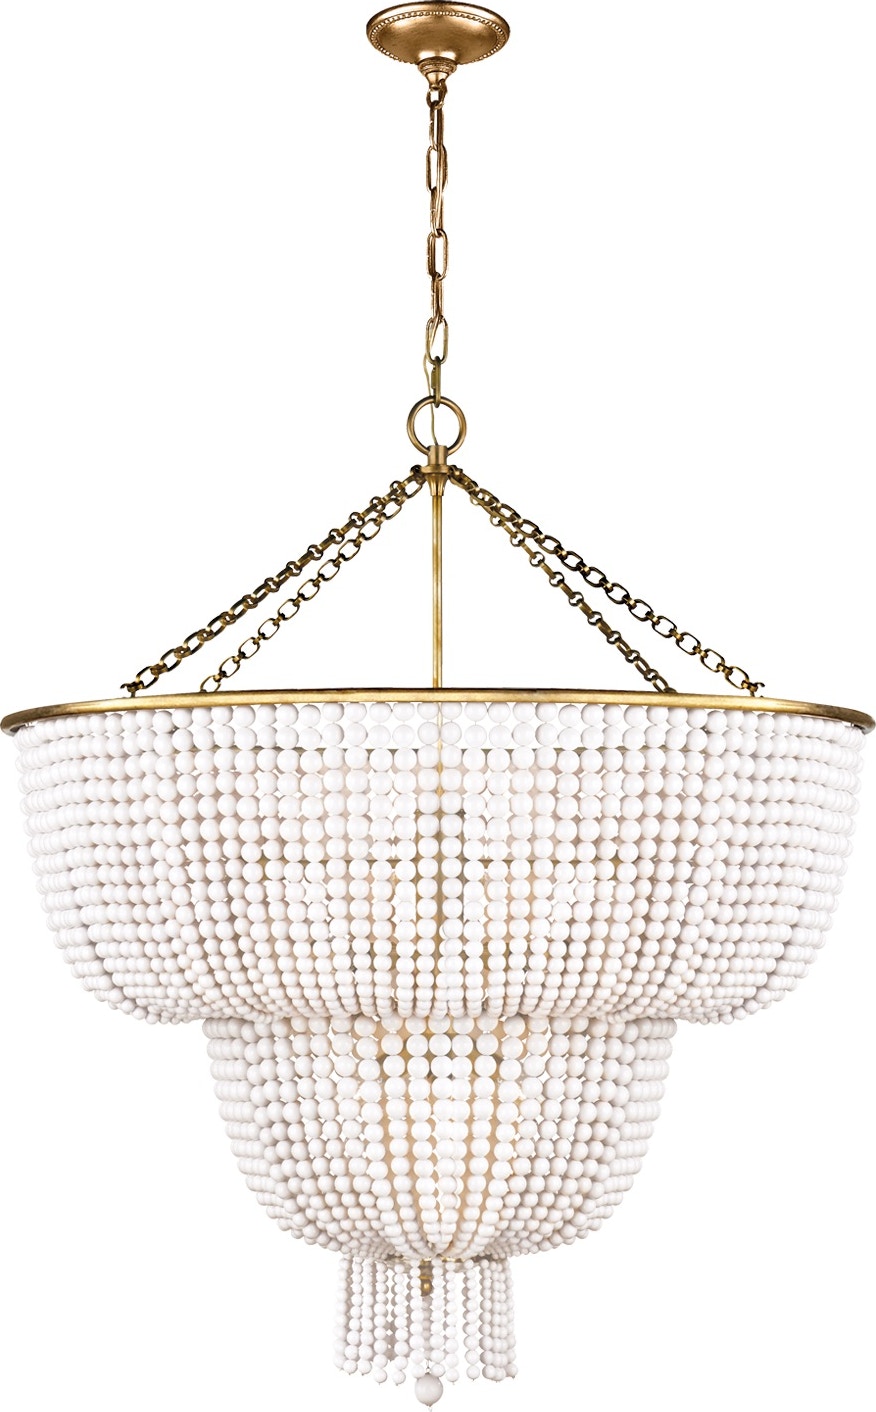 Brass Antique Jacqueline Acrylic Two-tier In With Hand-rubbed Chandelier White